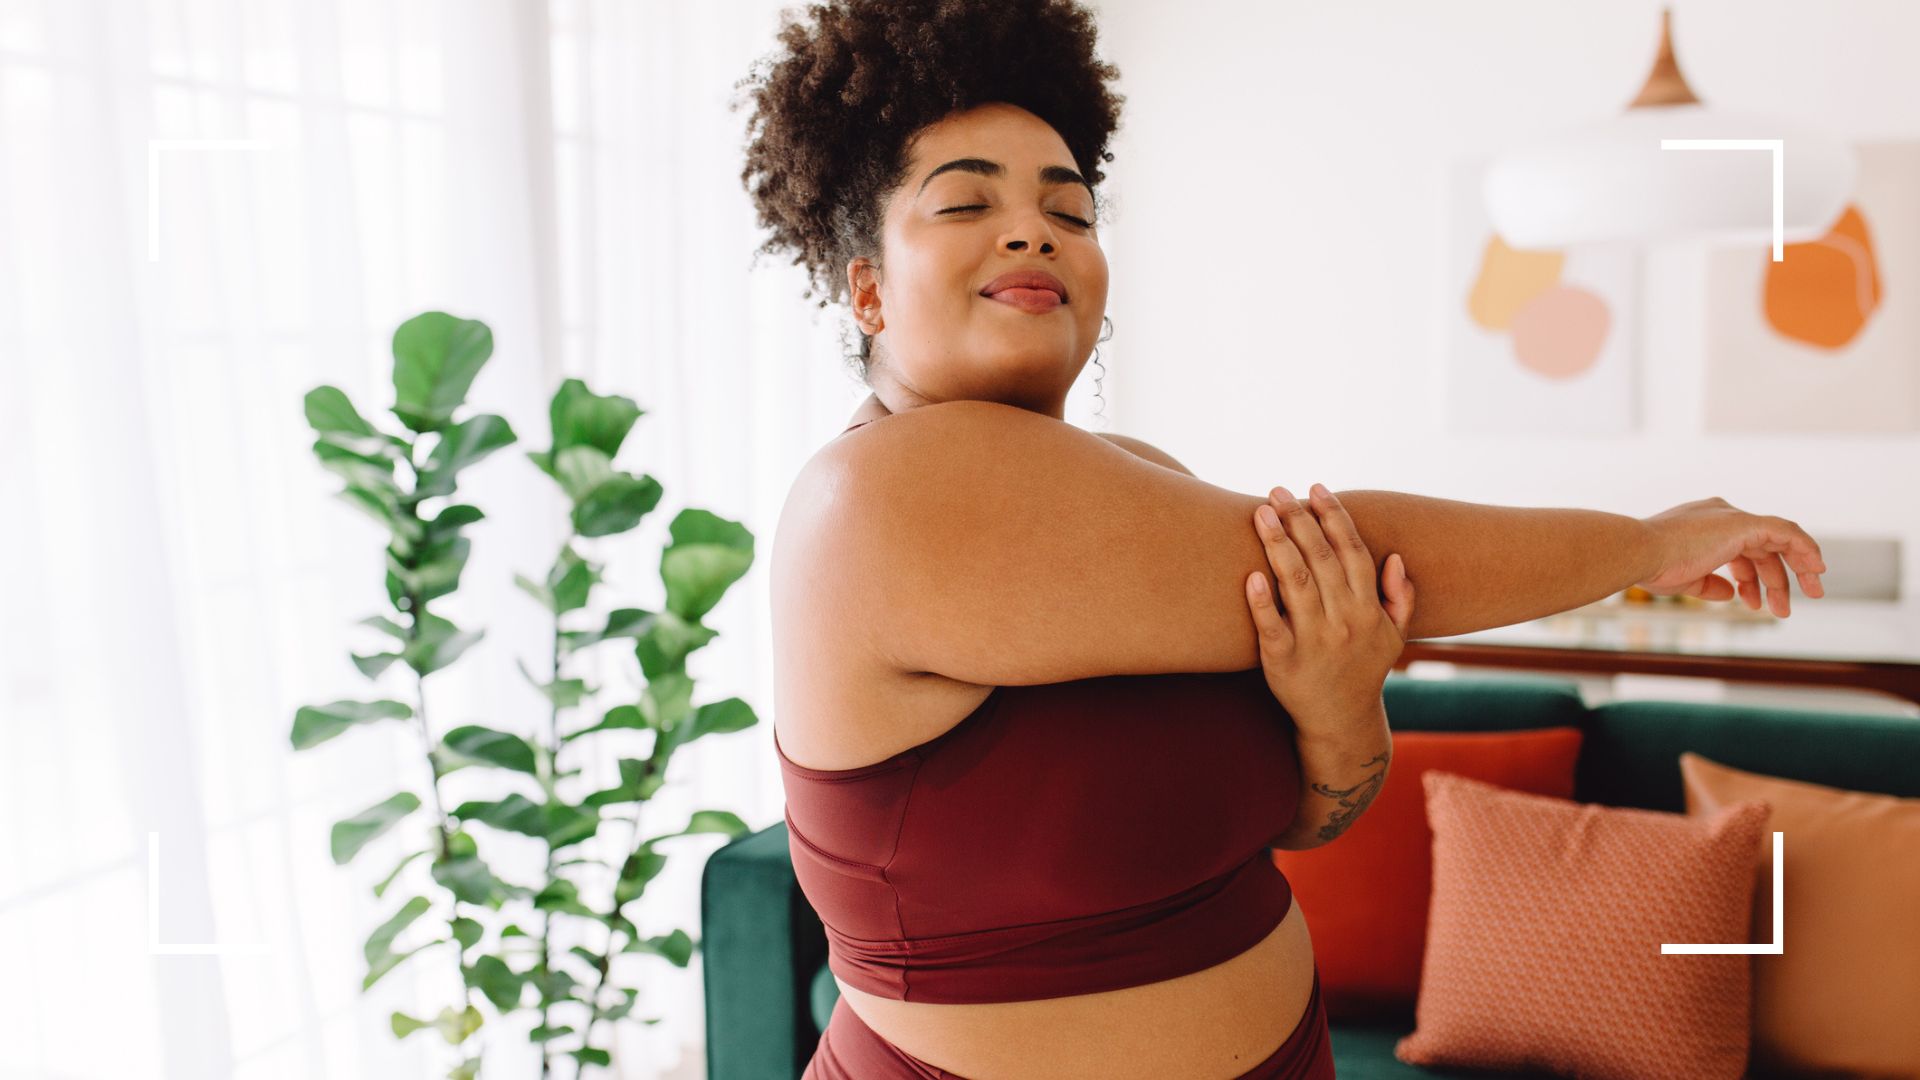 Here are 13 tips for body confidence - to boost self-love